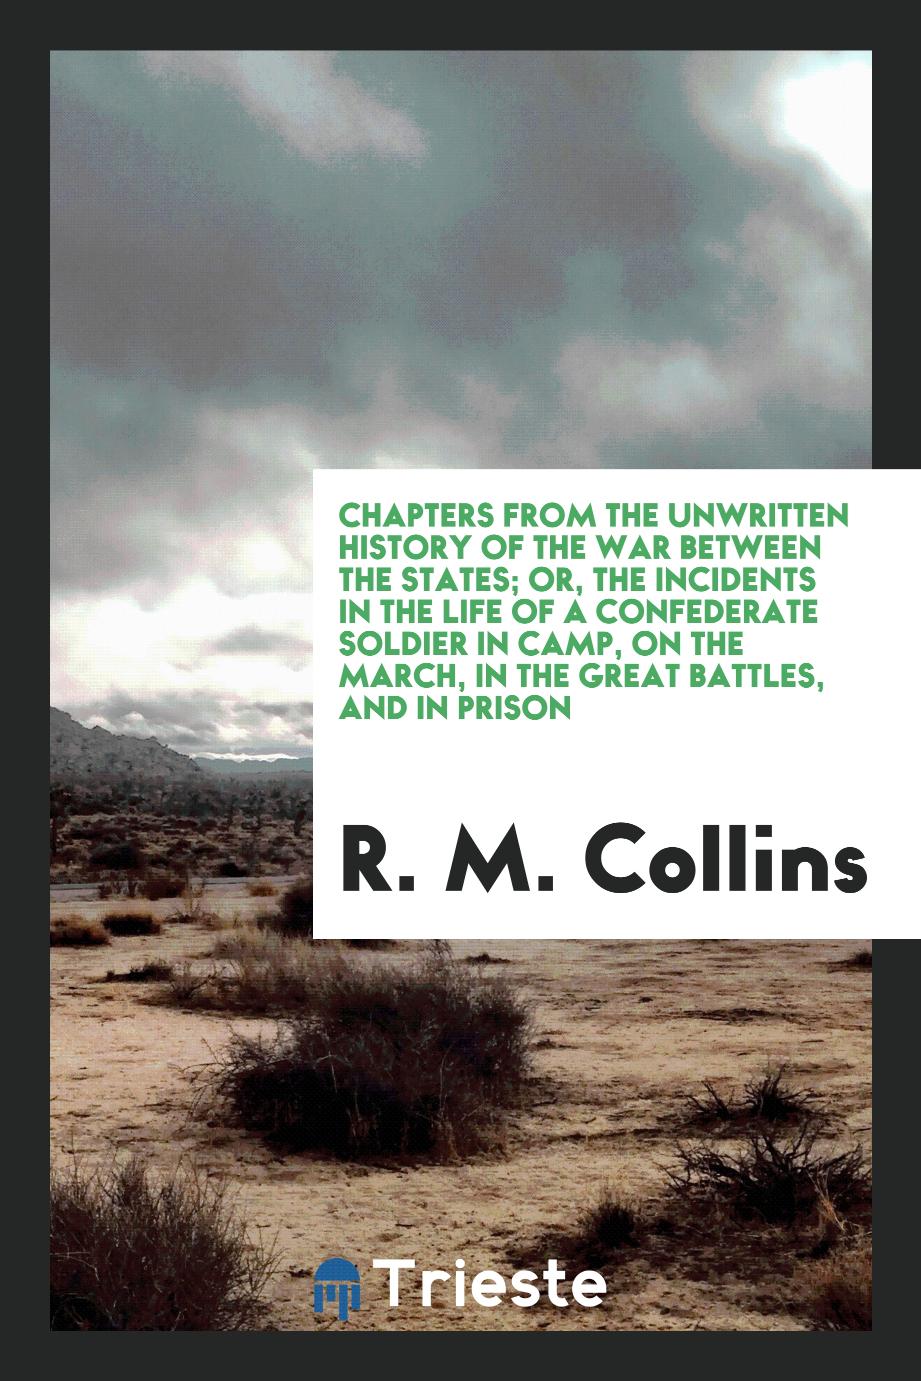 Chapters from the Unwritten History of the War Between the States; Or, The Incidents in the Life of a Confederate Soldier in Camp, on the March, in the Great Battles, and in Prison